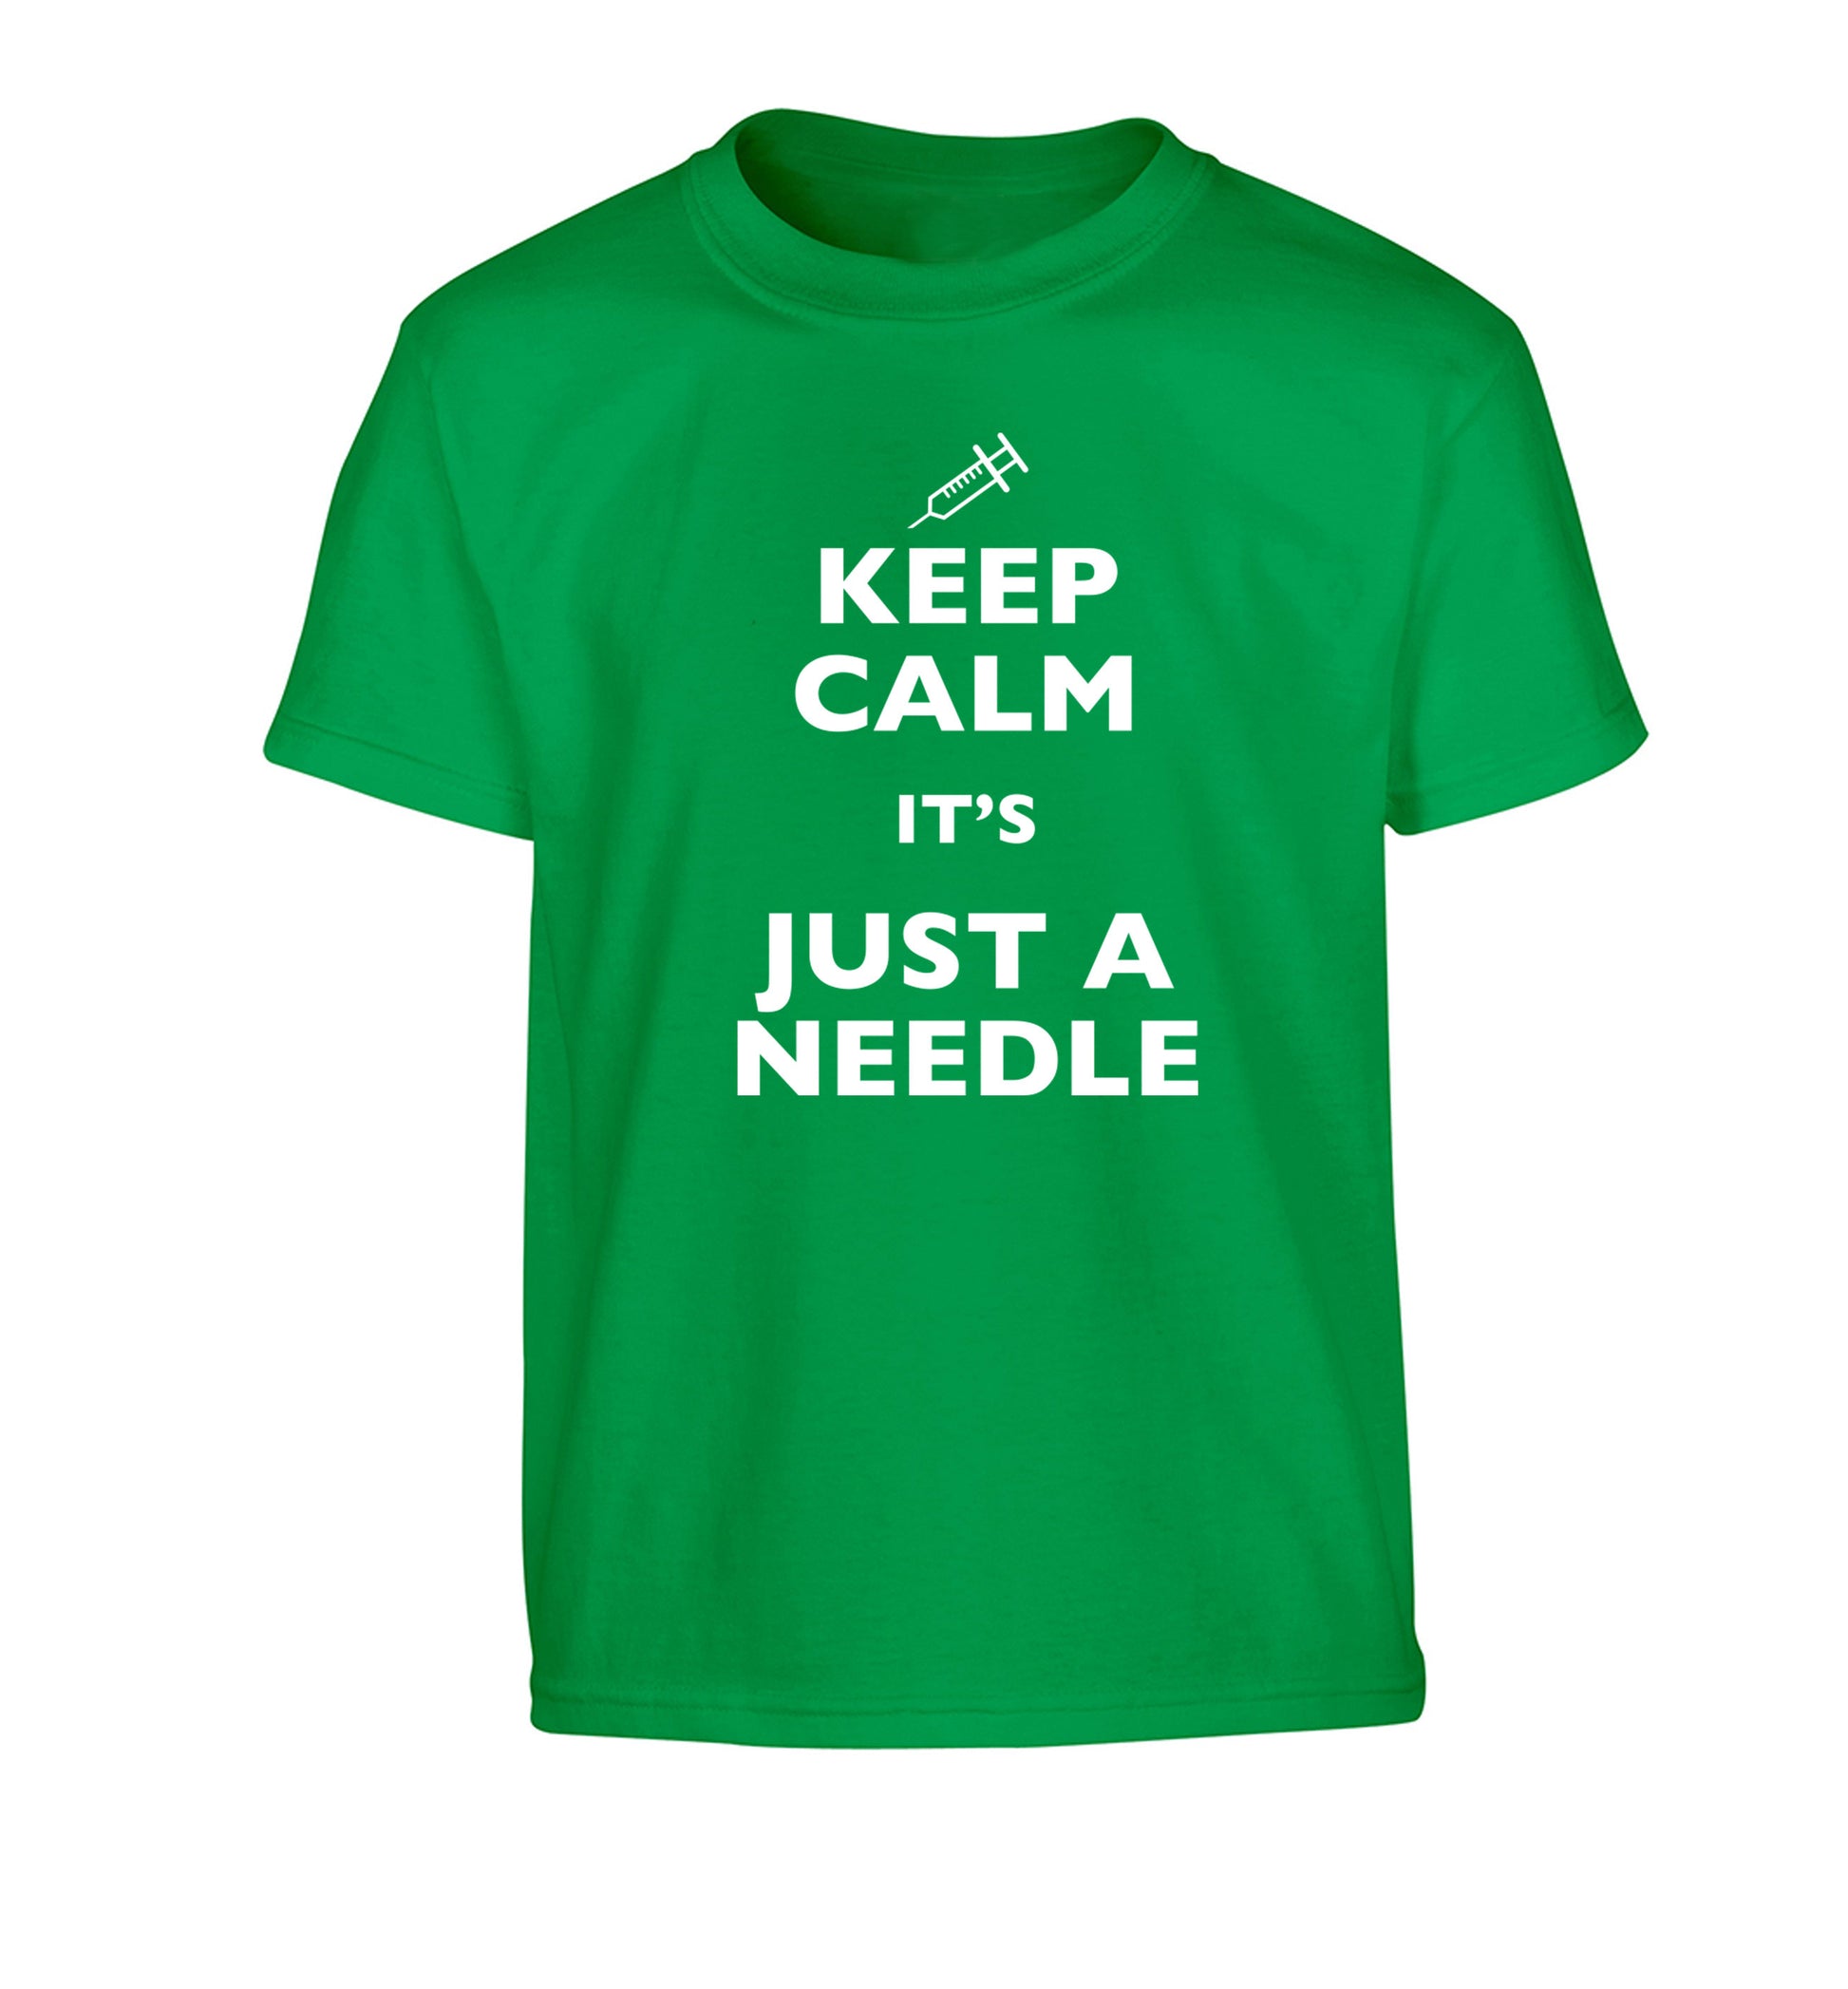 Keep calm it's only a needle Children's green Tshirt 12-14 Years